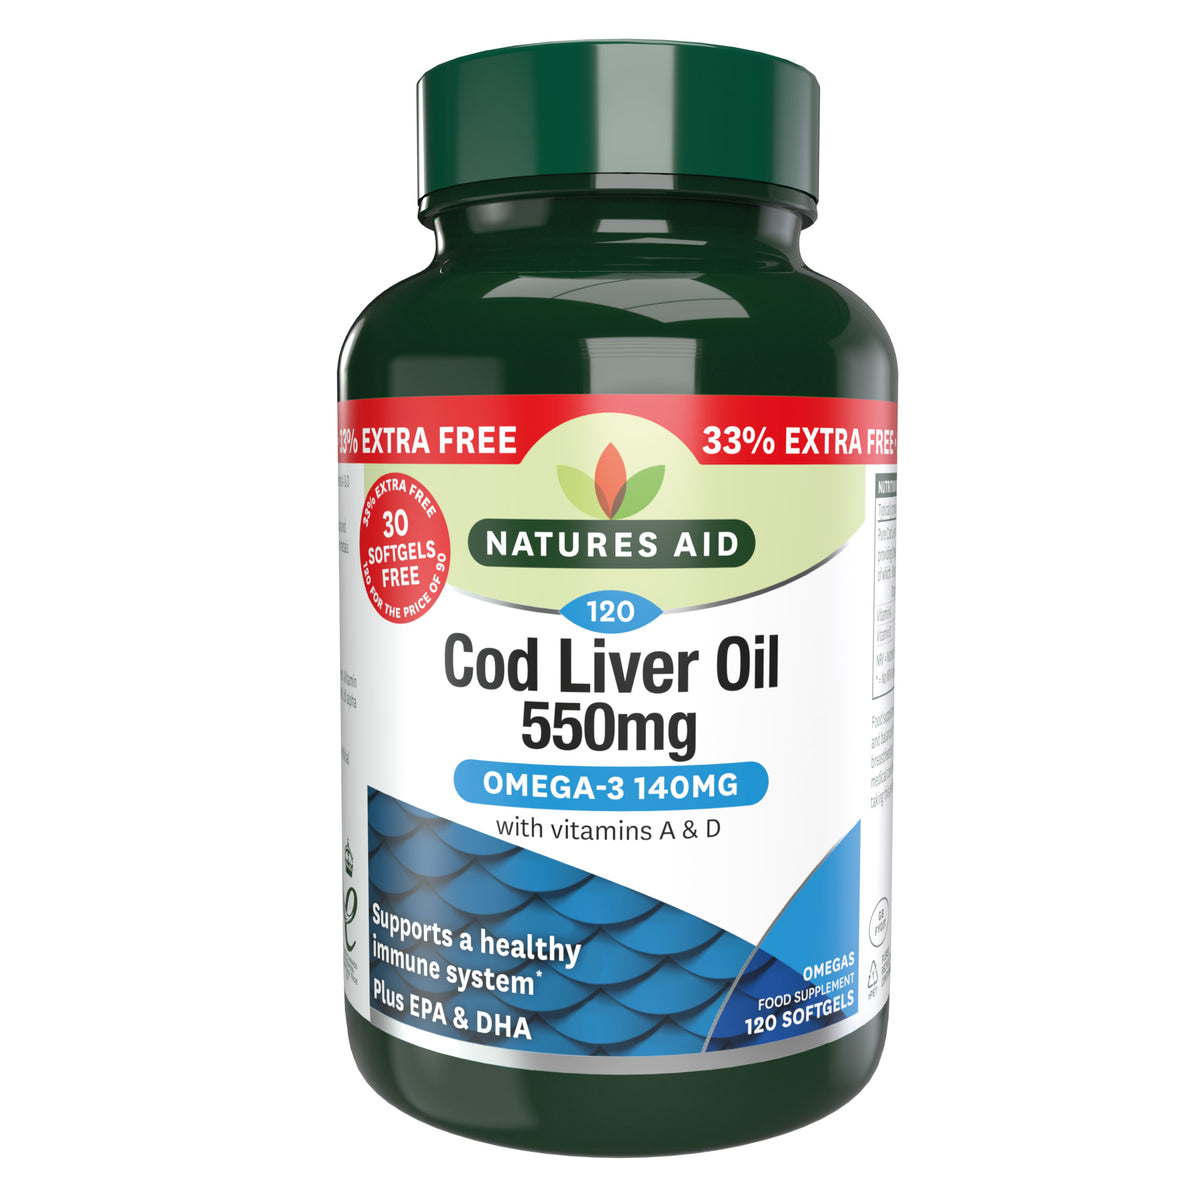 Natures Aid Cod Liver Oil 550Mg 33% Extra Free 120 softgels